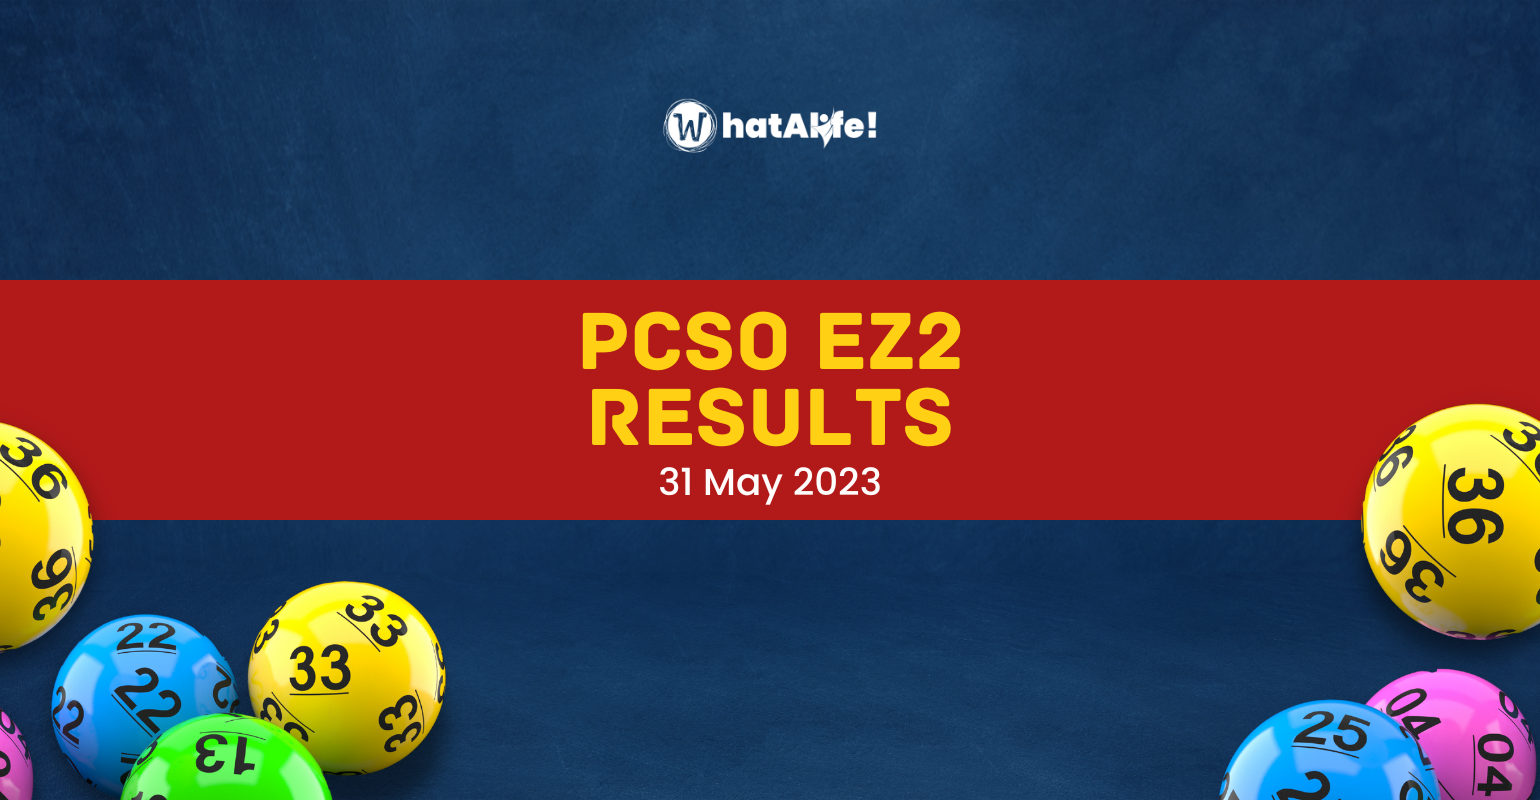 EZ2 2D RESULTS May 31, 2023 (Wednesday)